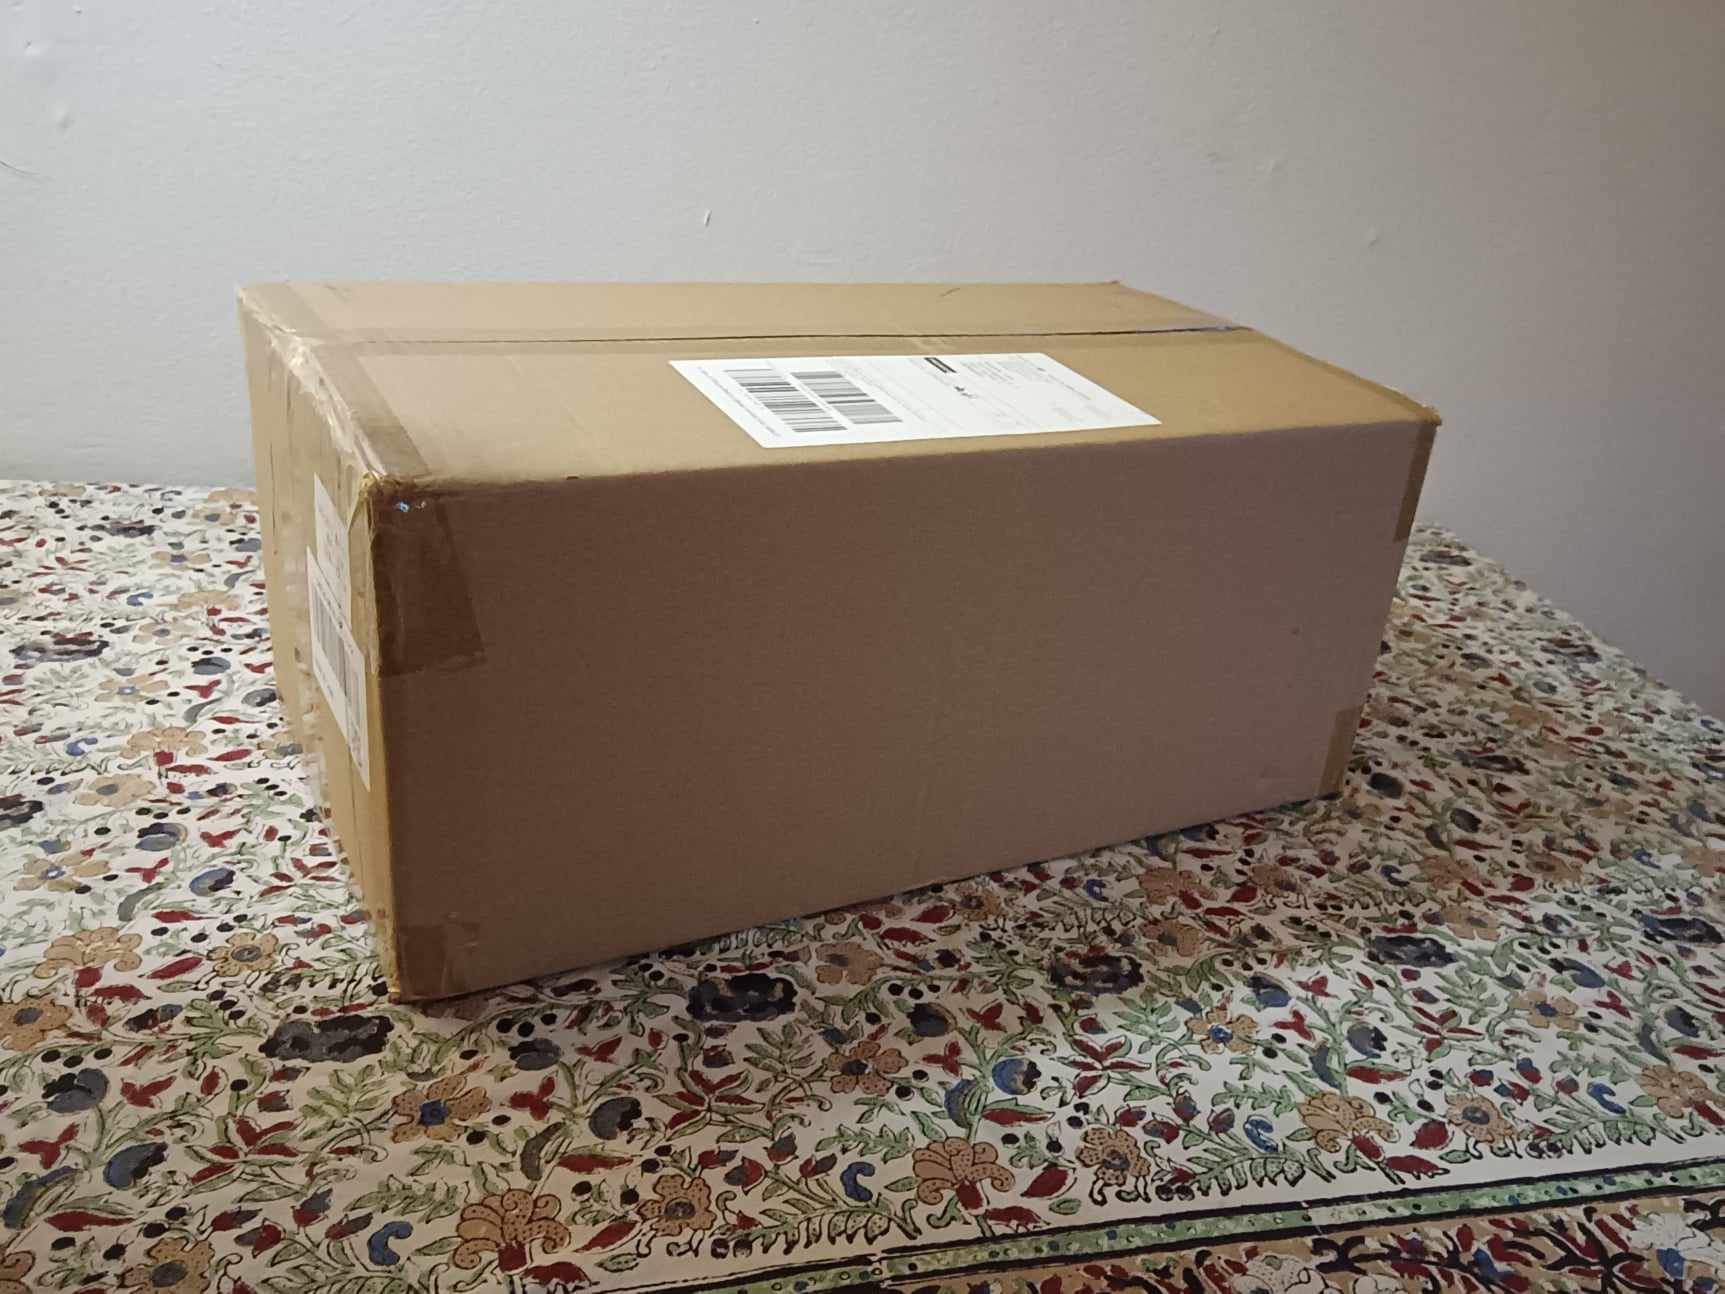 Hismith Table Top 2.0 Max Unwrapping Excitement: A Packaging Review